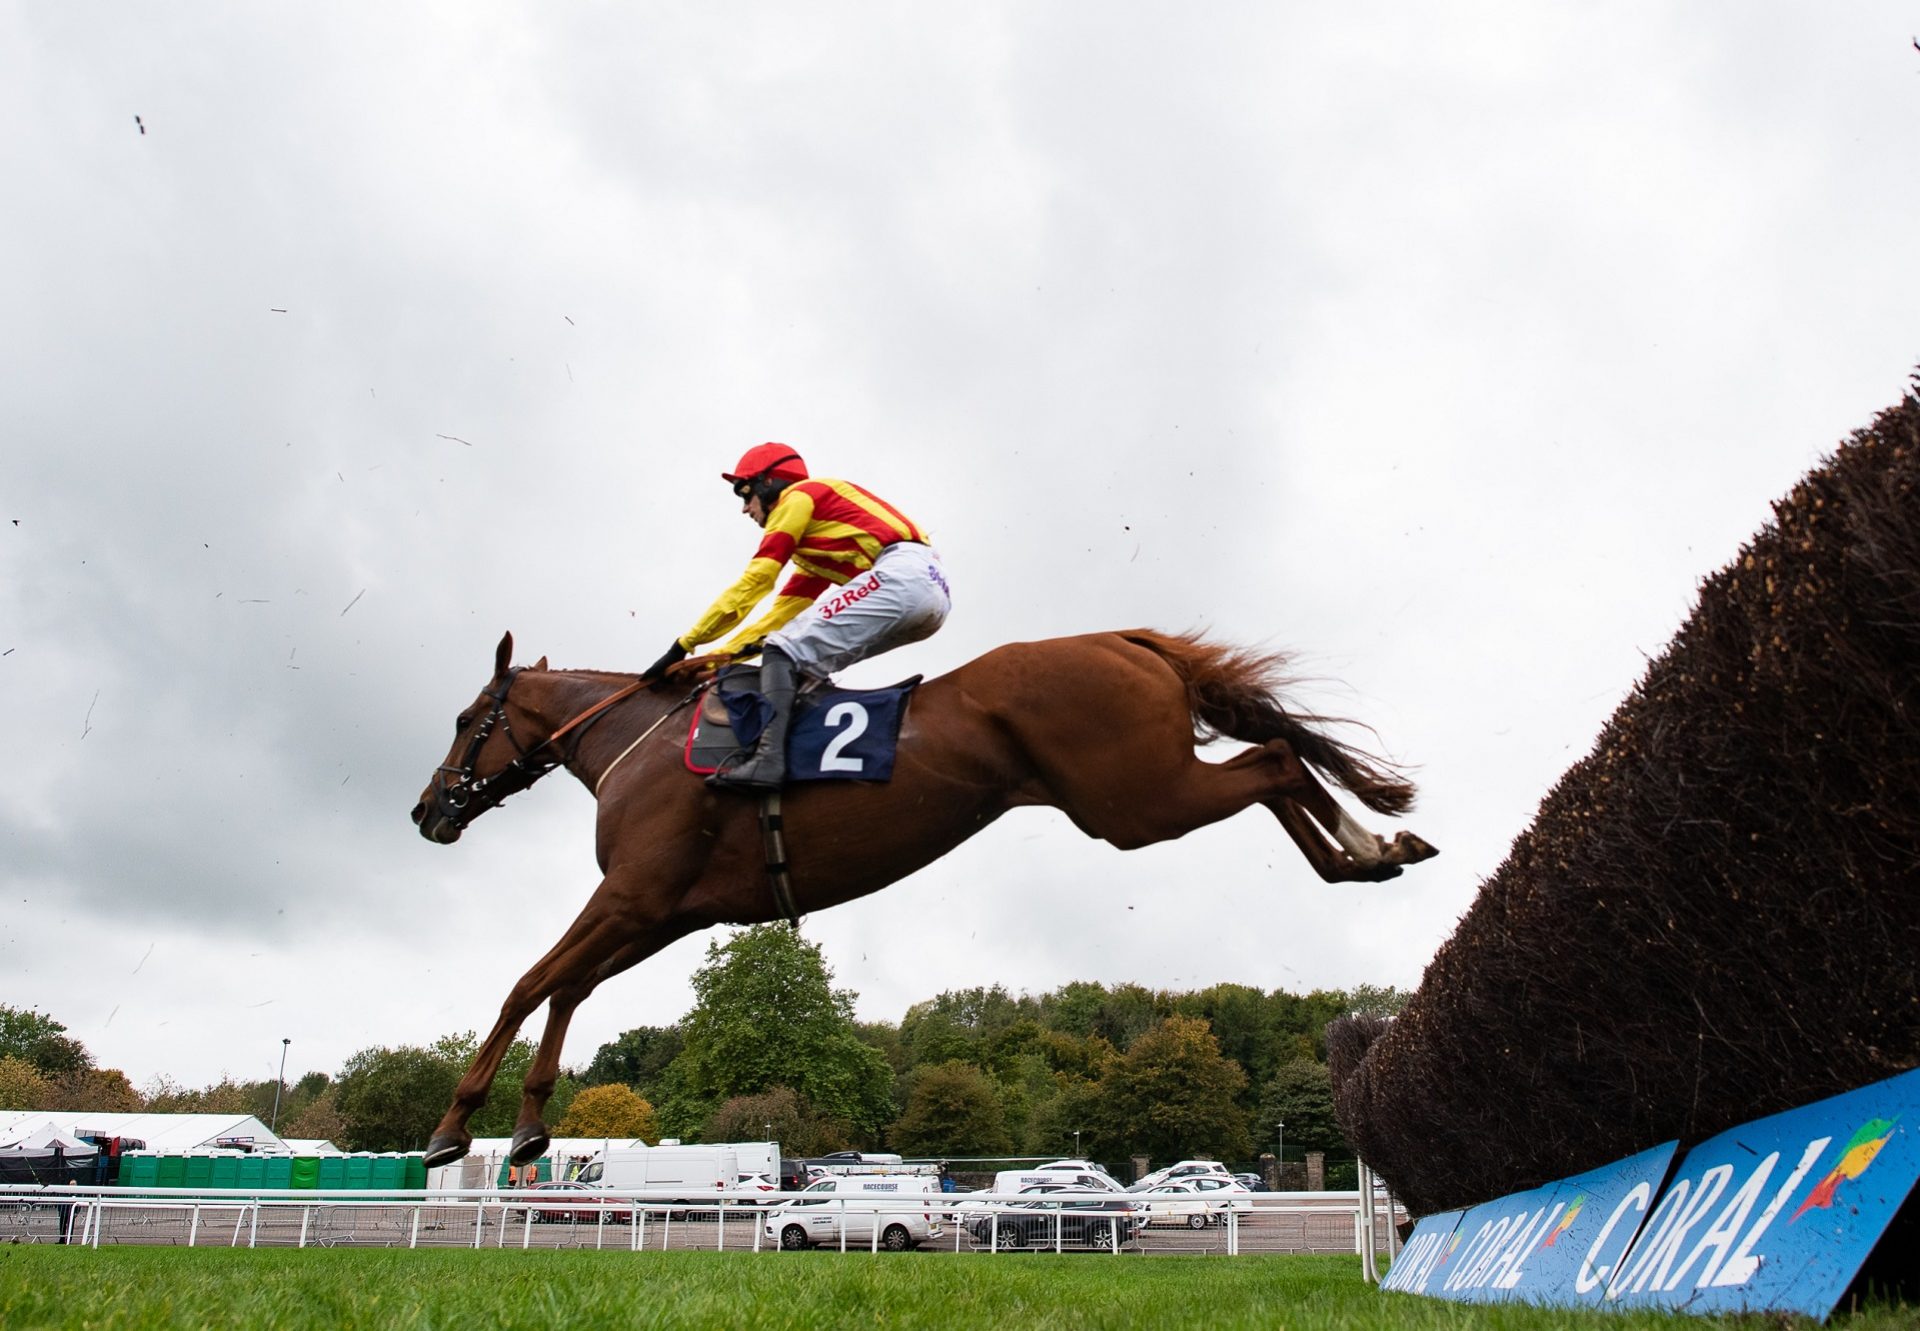 Jarveys Plate (Getaway) winning the Listed Novices’ Chase at Chepstow